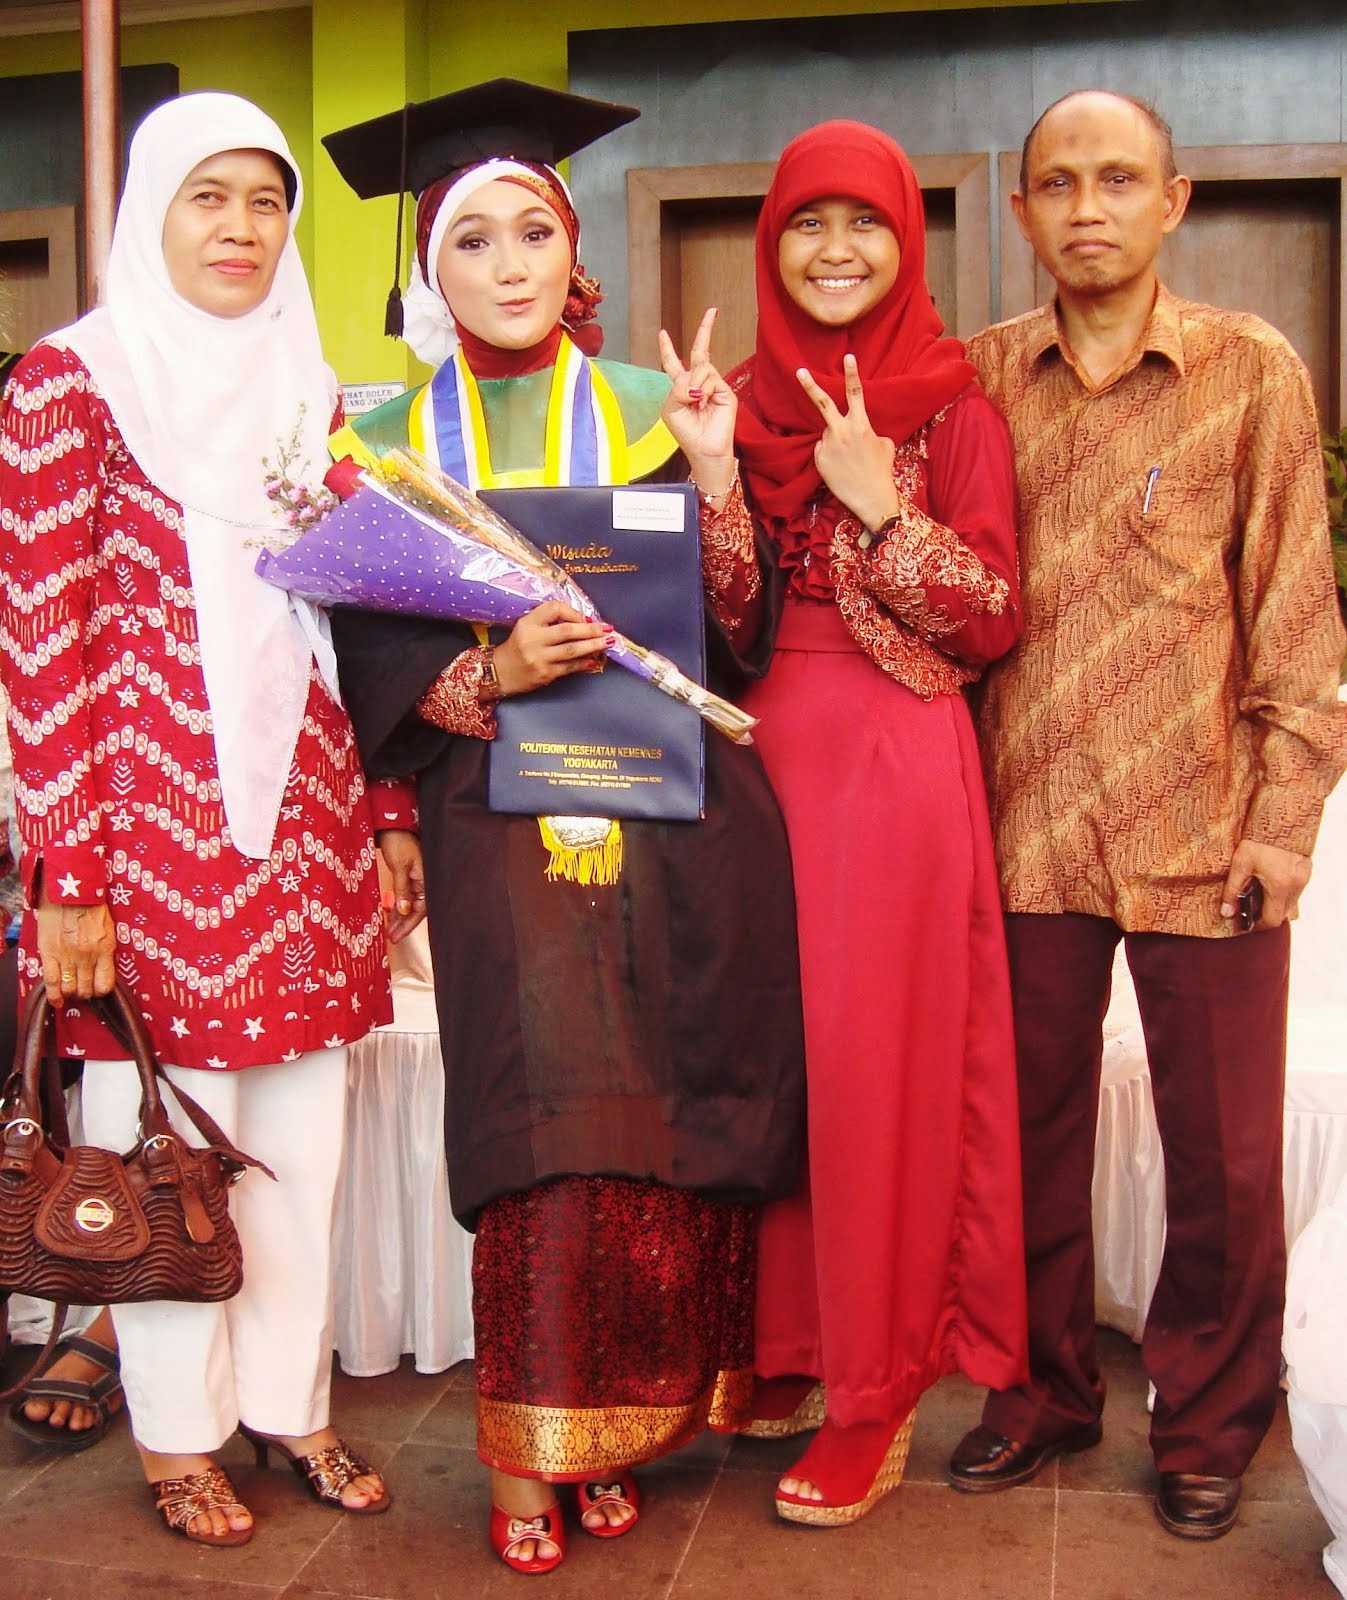 My Familly :)